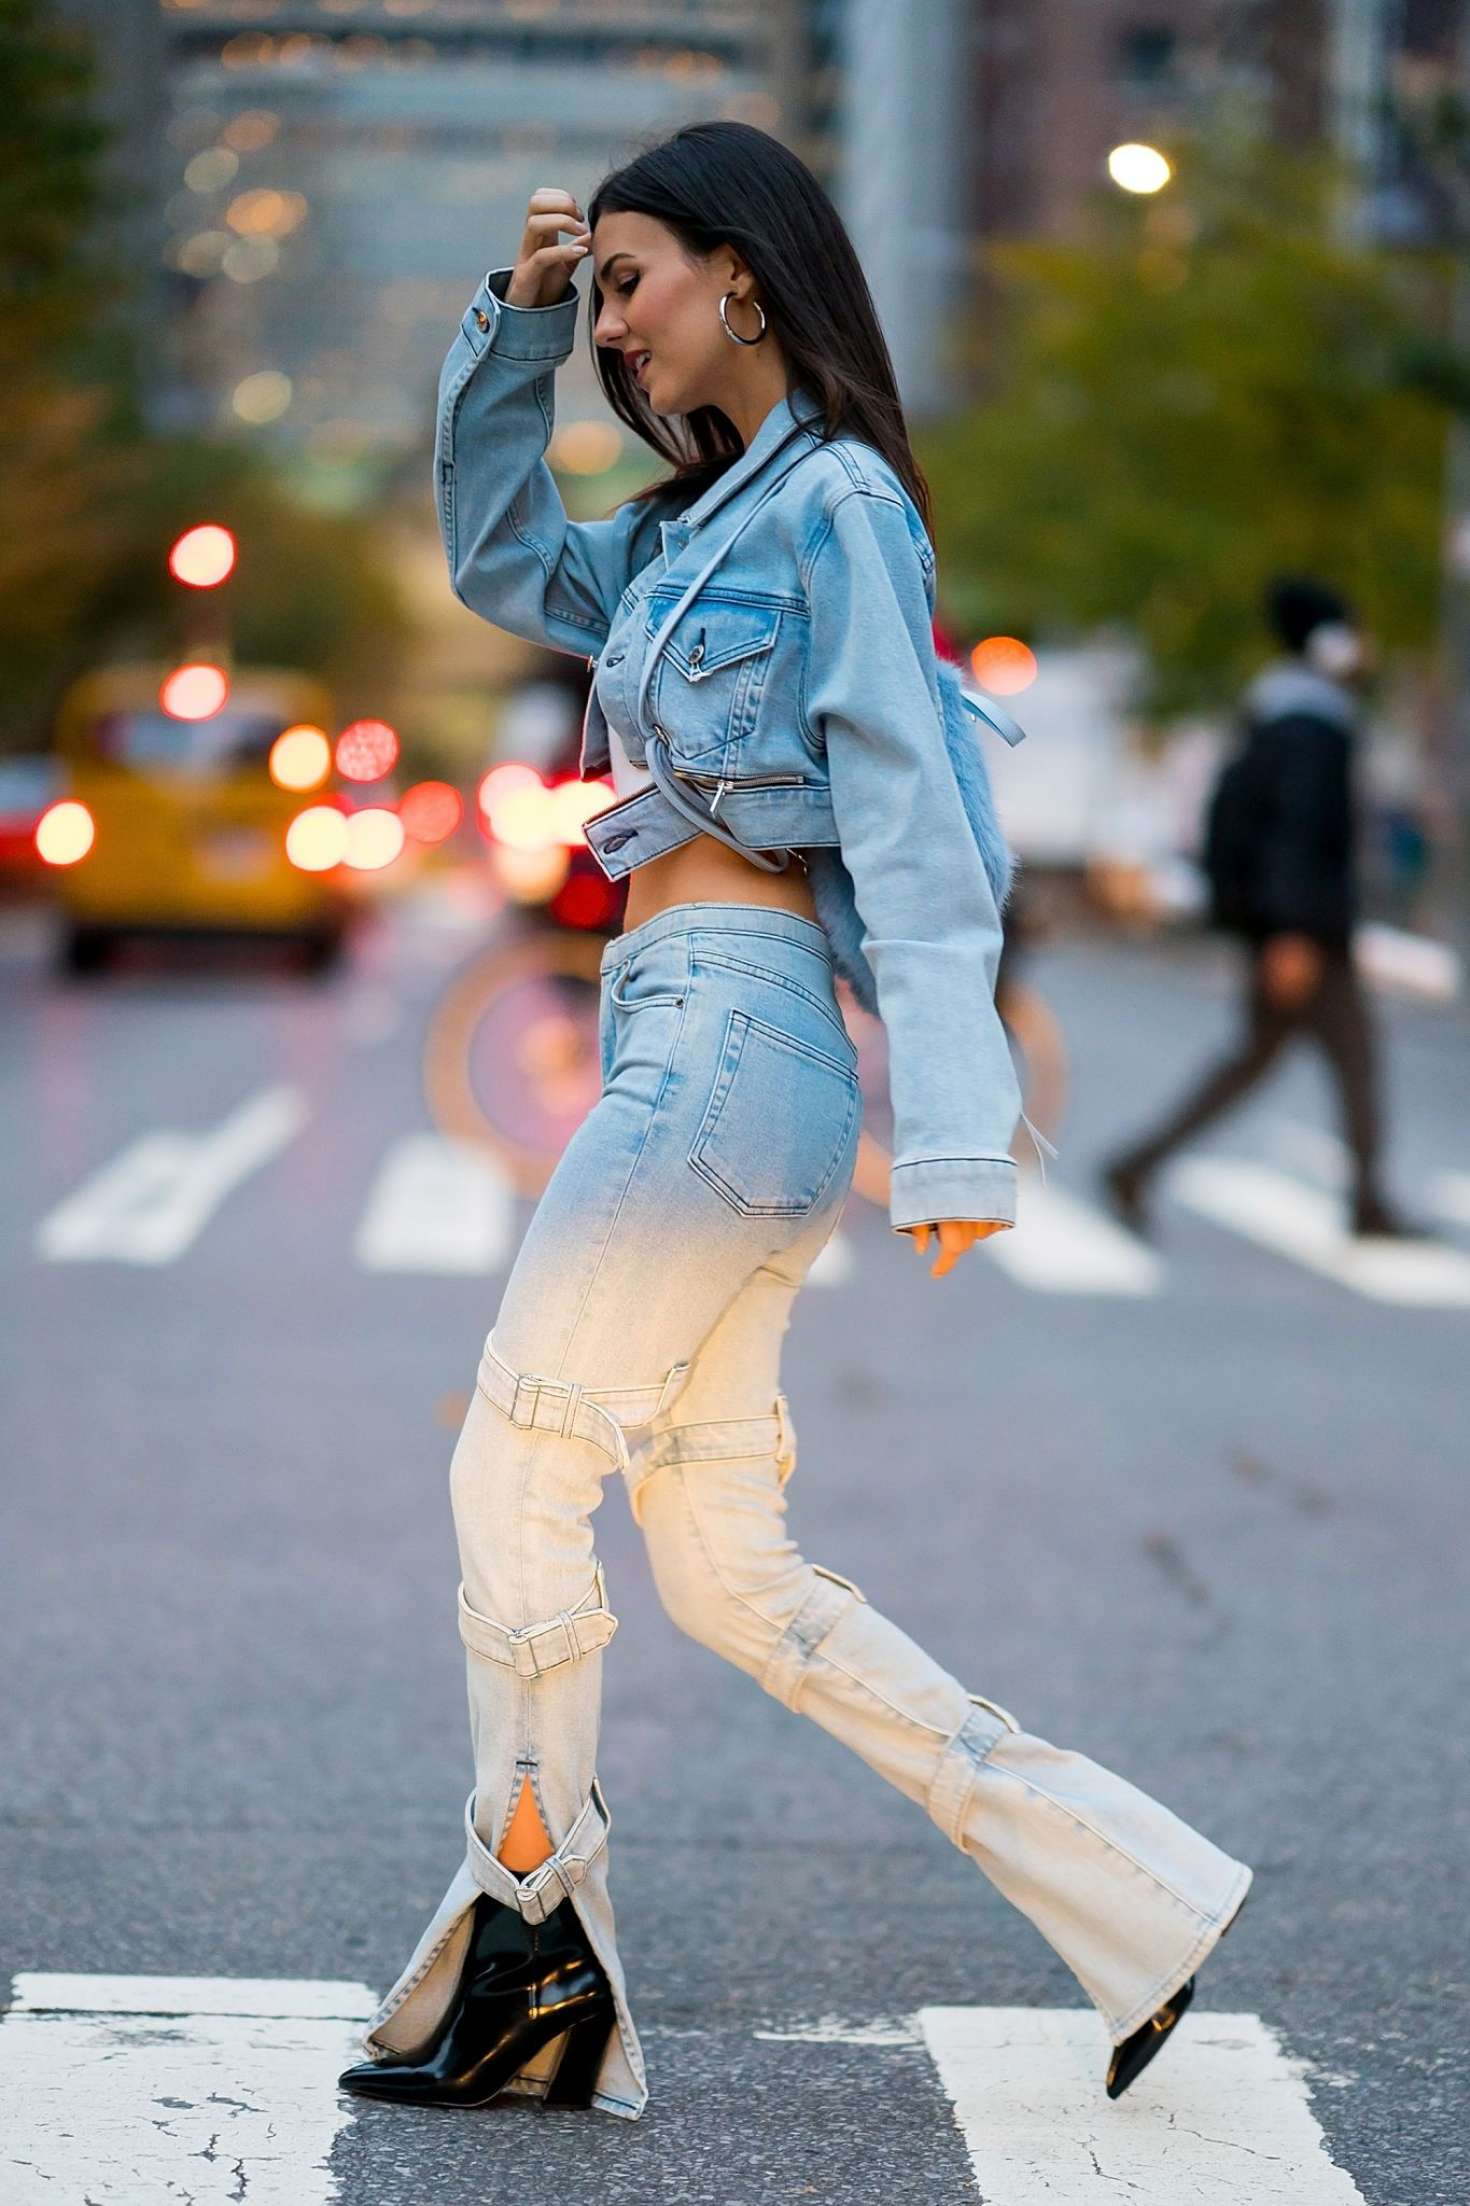 Victoria Justice in Denim Outfit â€“ Out and about in NYC